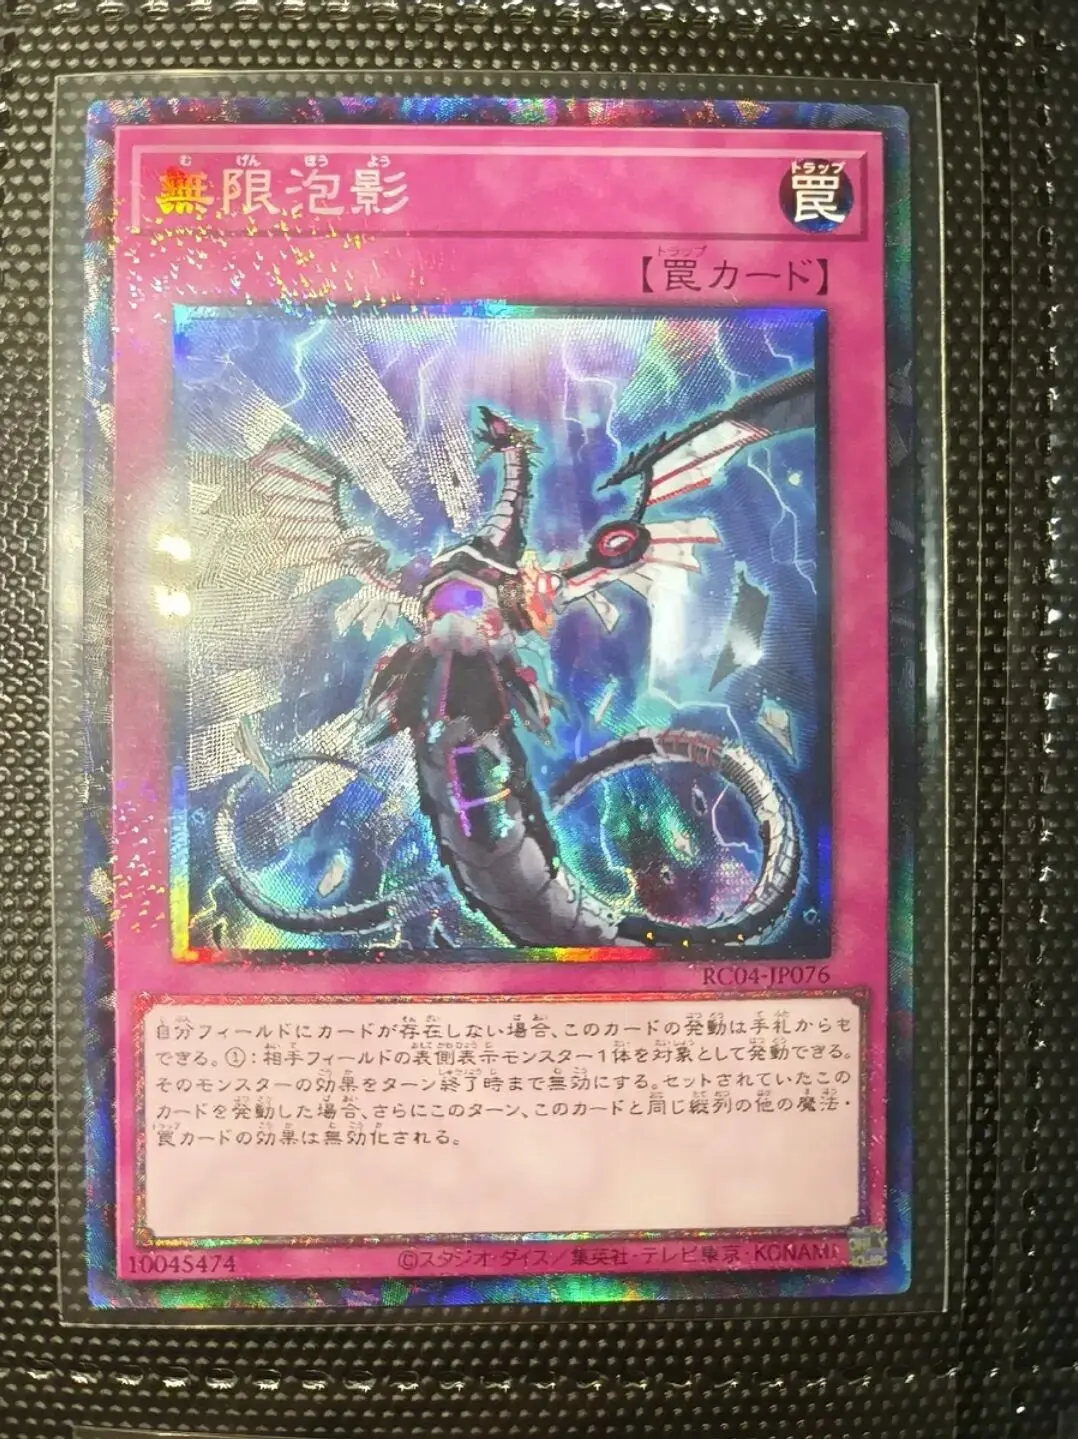 

Duel Master Infinite Impermanence - Collector's Rare RC04-JP076 Rarity Collection - YuGiOh Collection Card